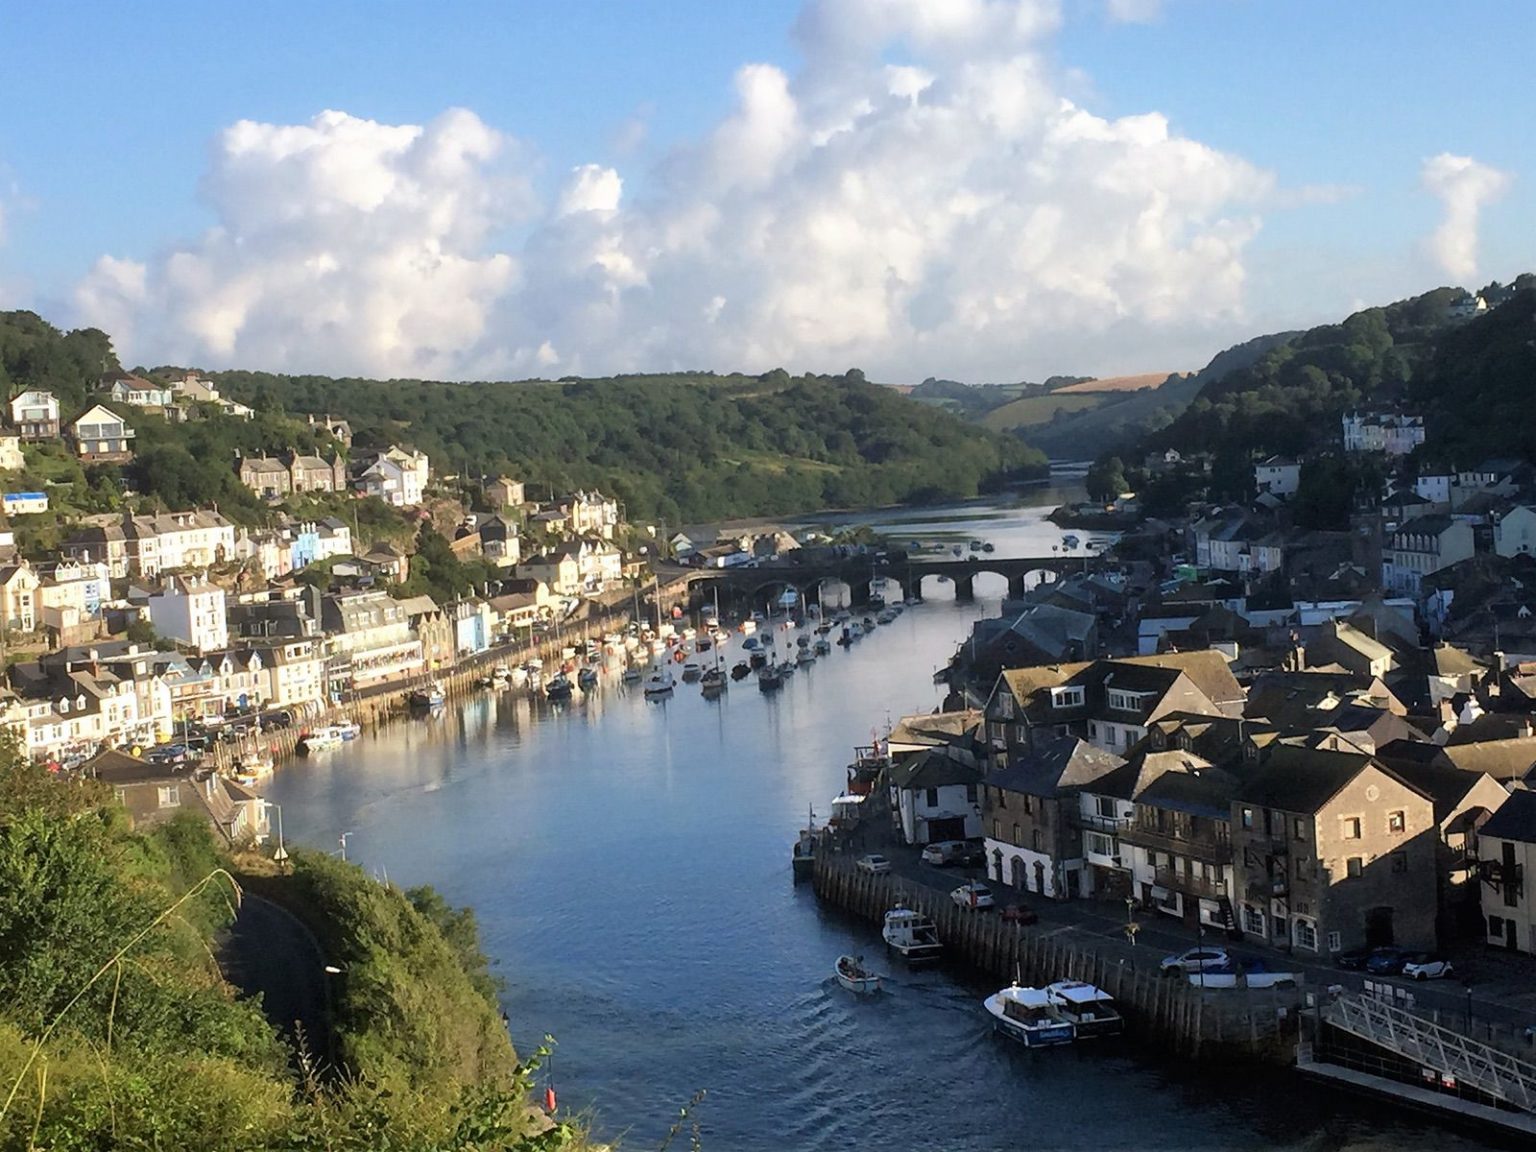 10 Things To Do In Looe For Wonderful Holiday Memories